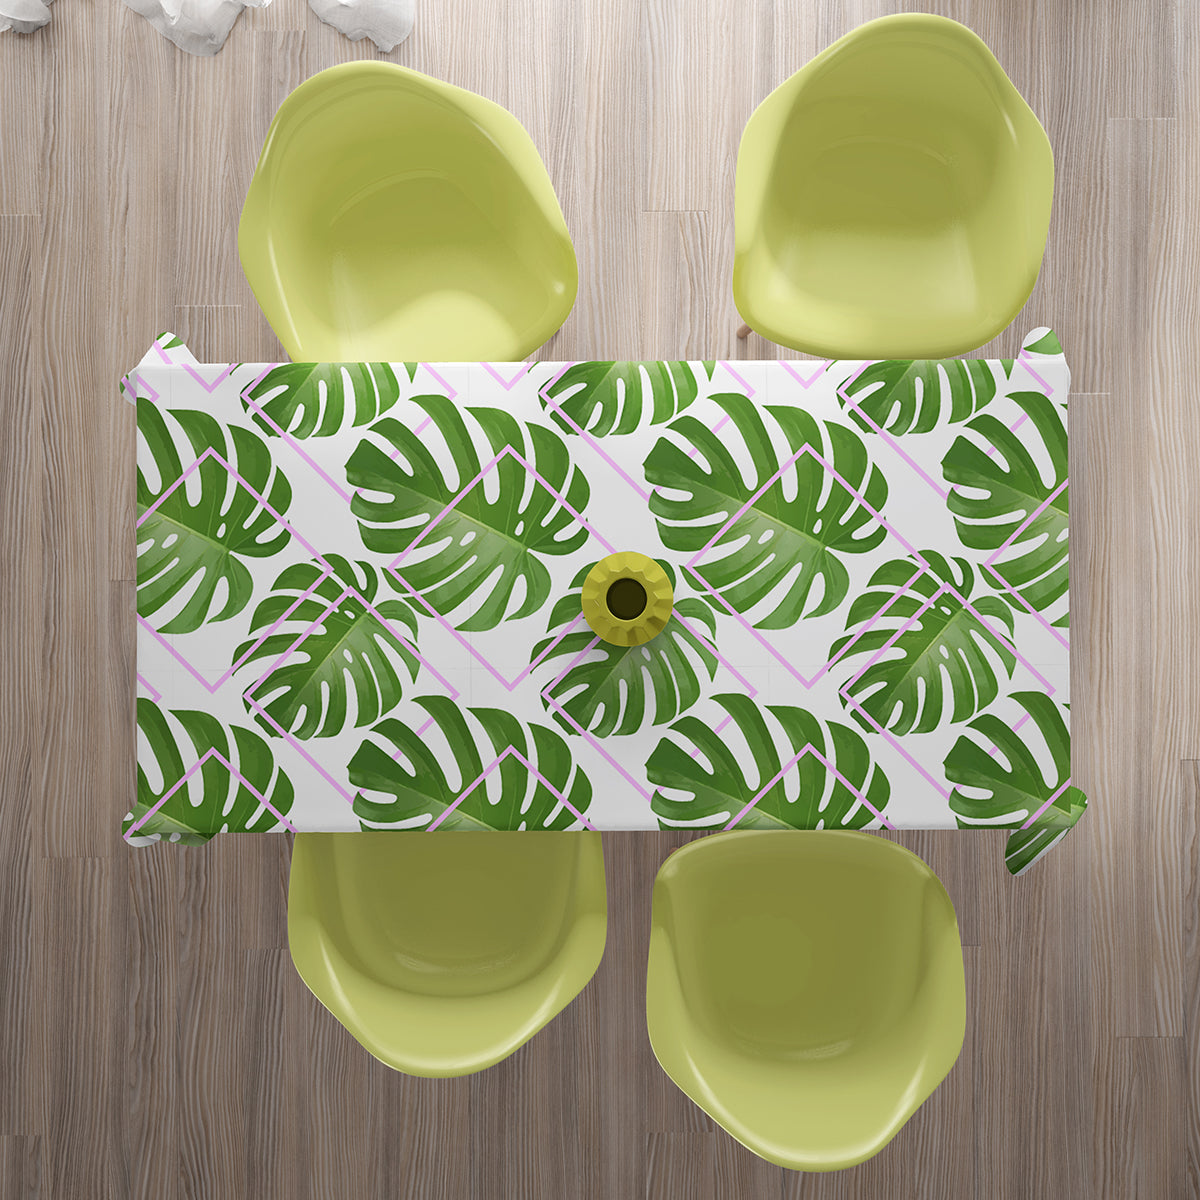 Tablecloth Tropical Palm Leaves - Wellmira